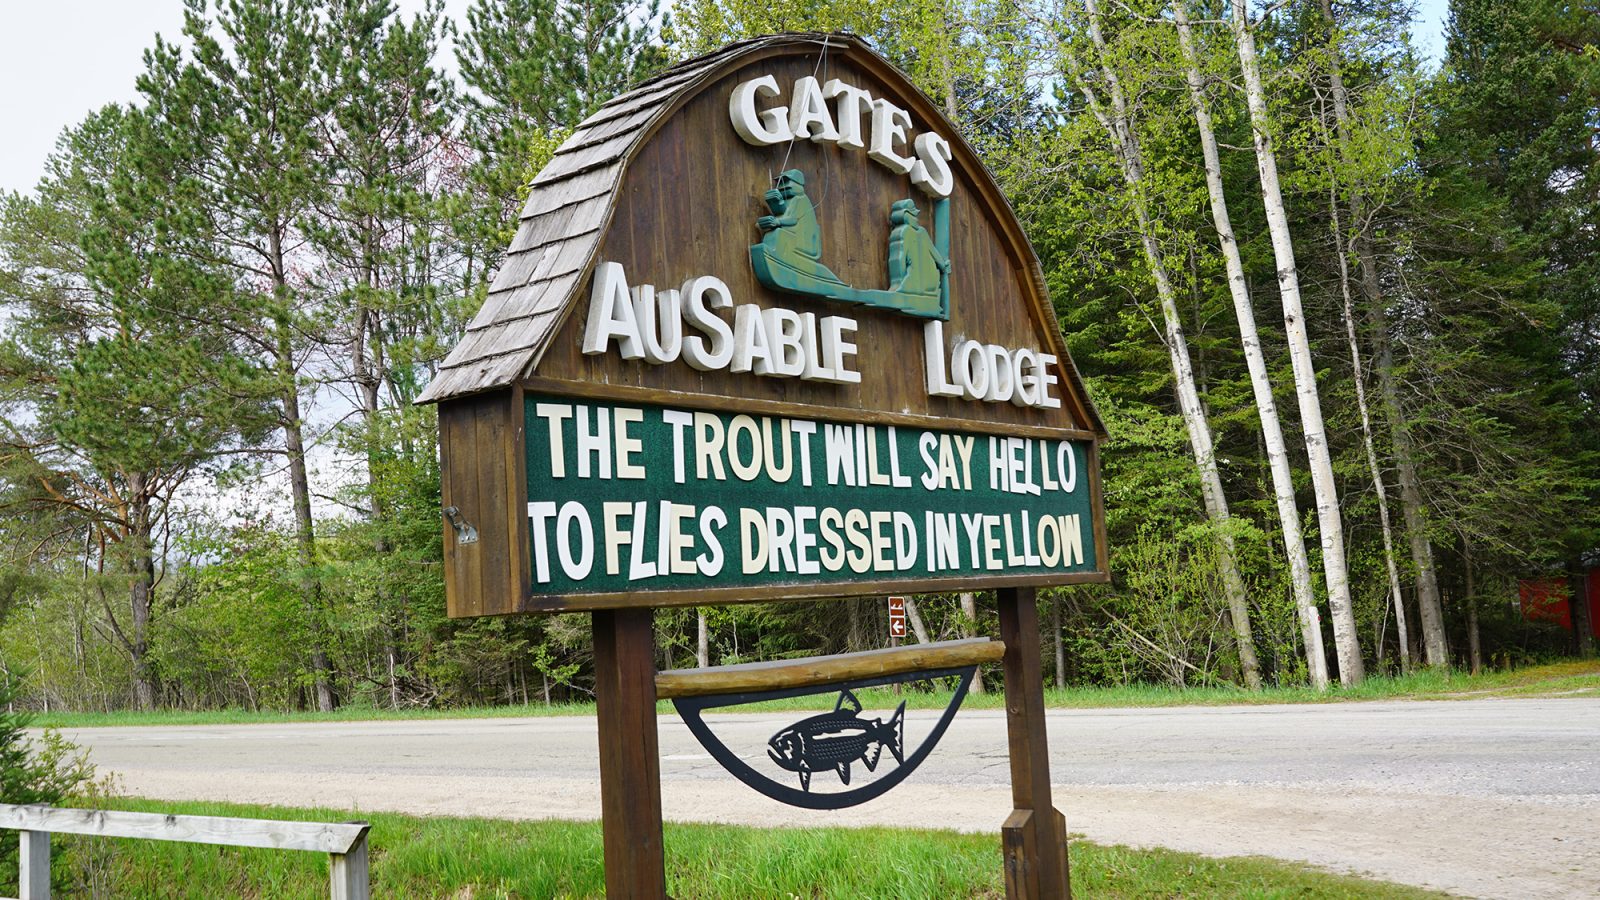 A welcoming sign of Gates Au Sable Lodge, inviting you to experience the tranquil beauty of the surrounding wilderness.